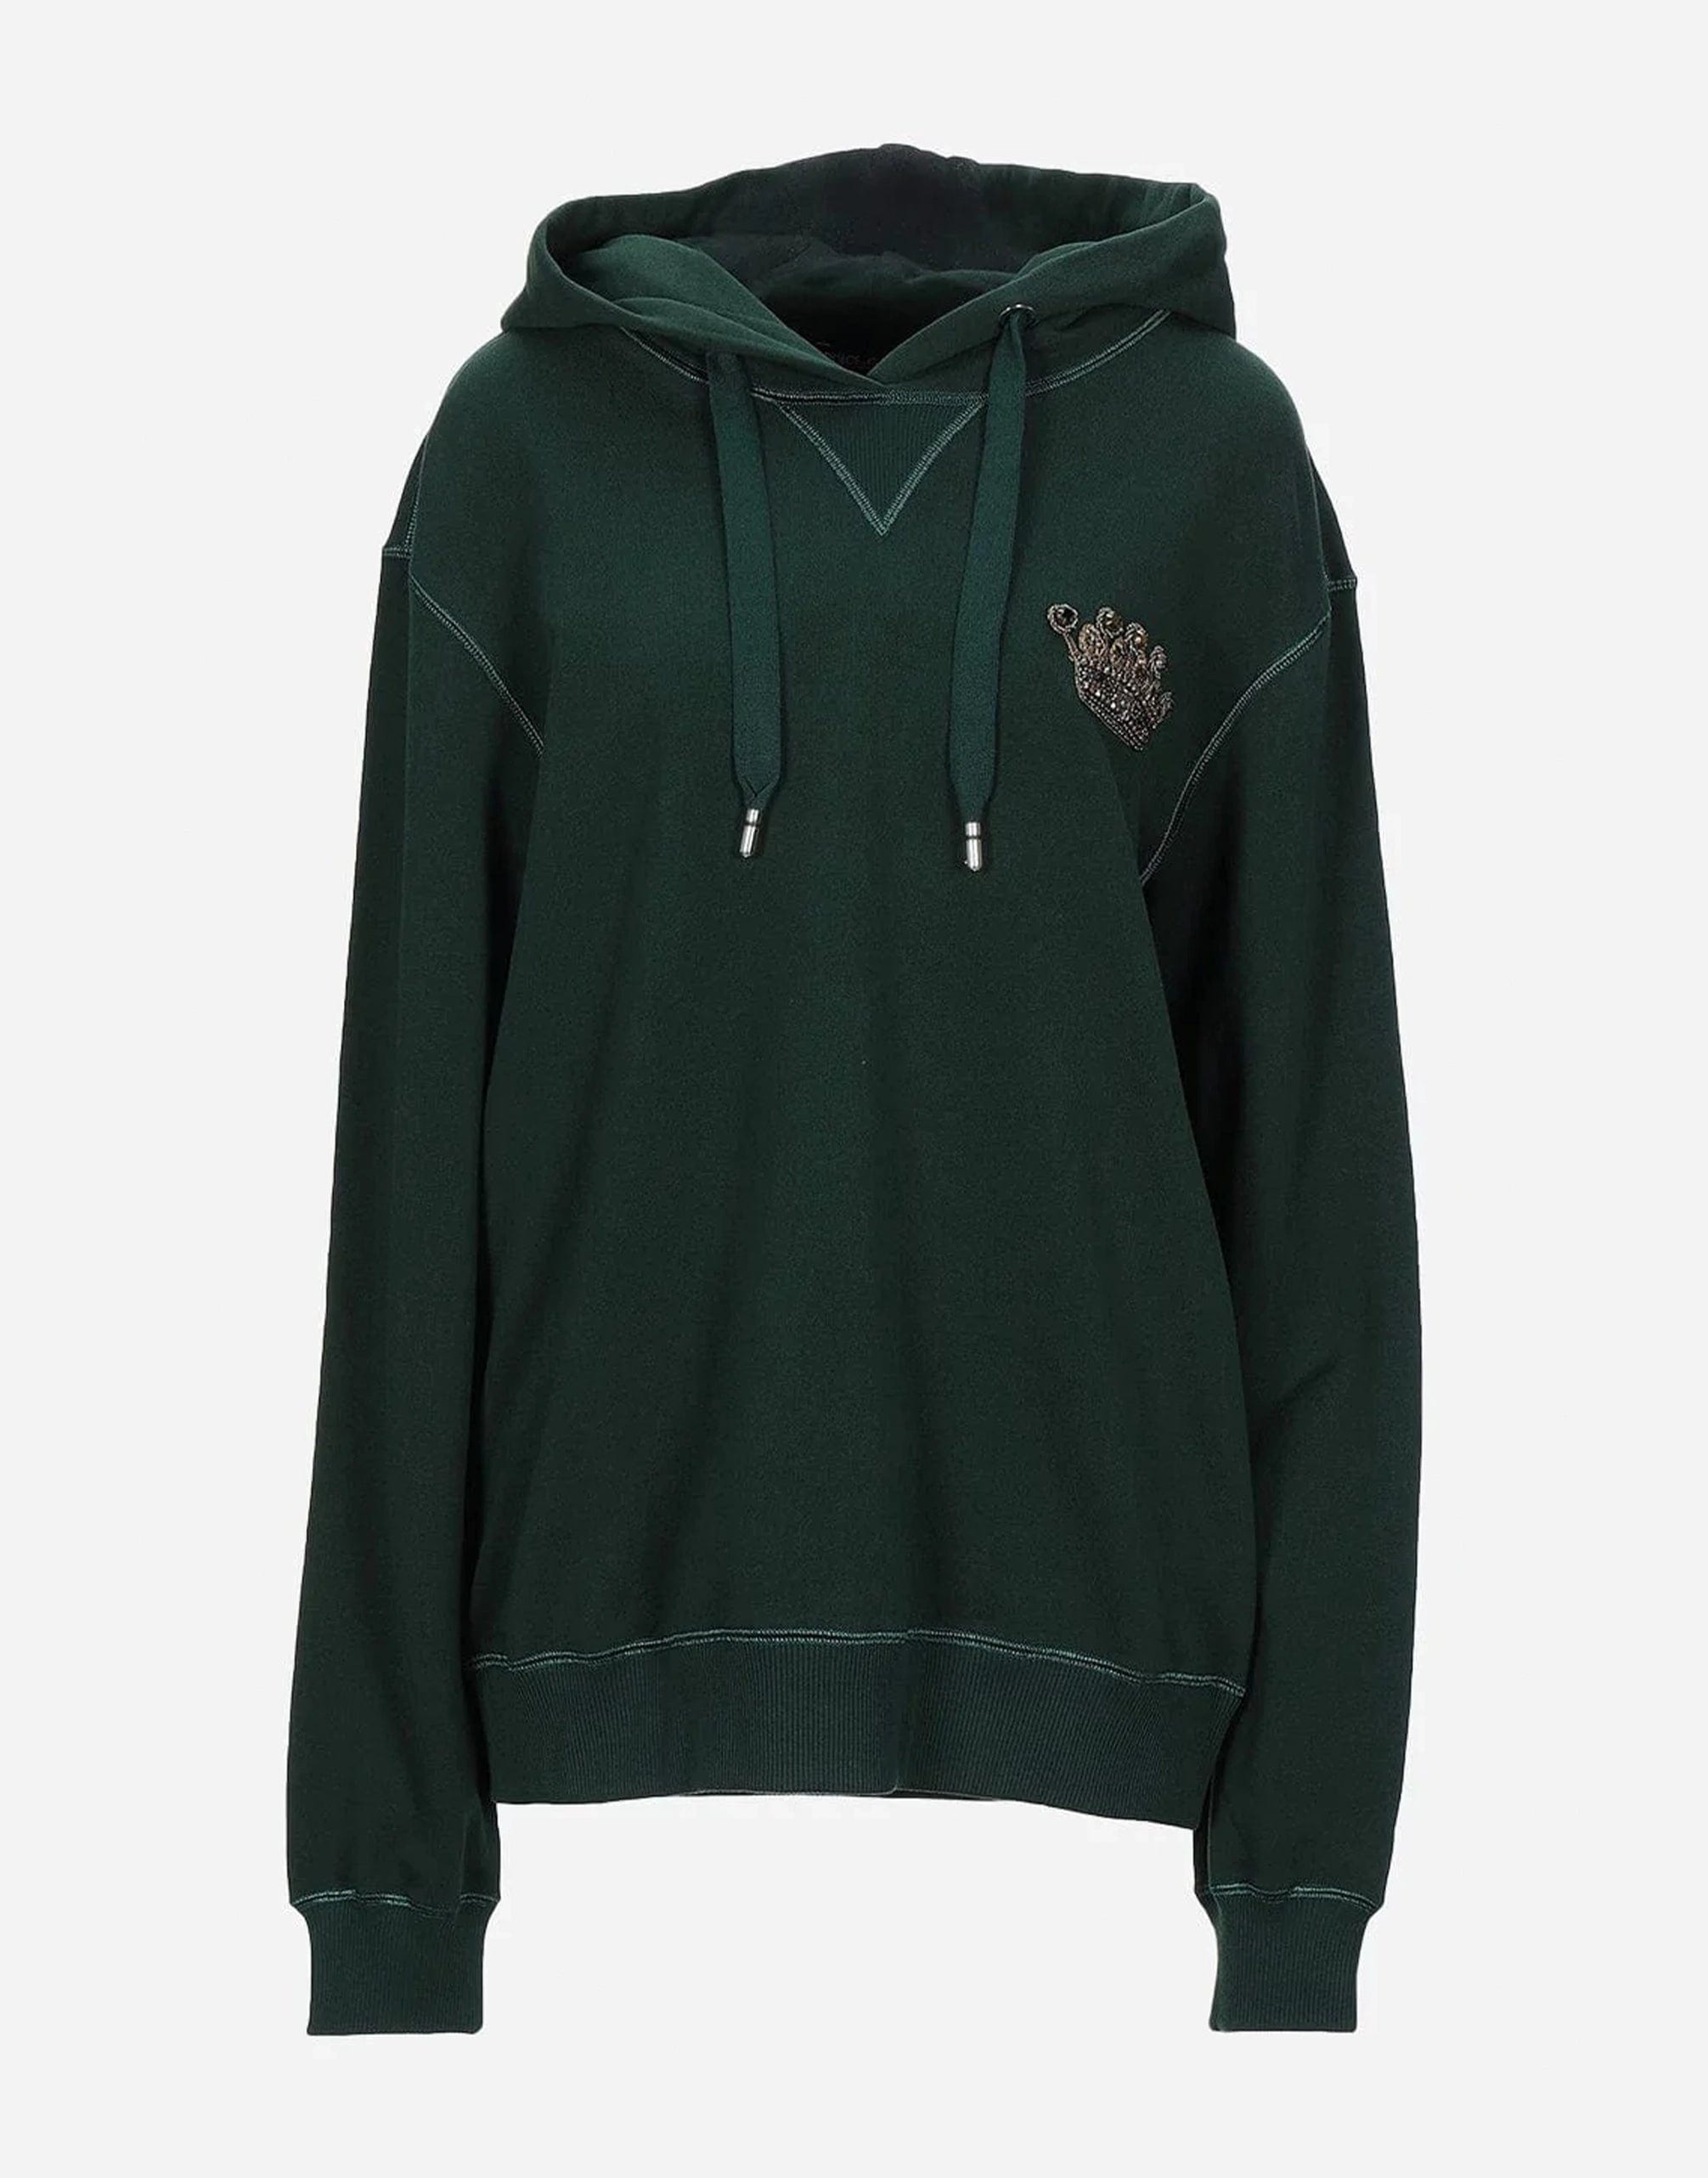 Dolce & Gabbana Embellished Crown Embroidery Hoodie